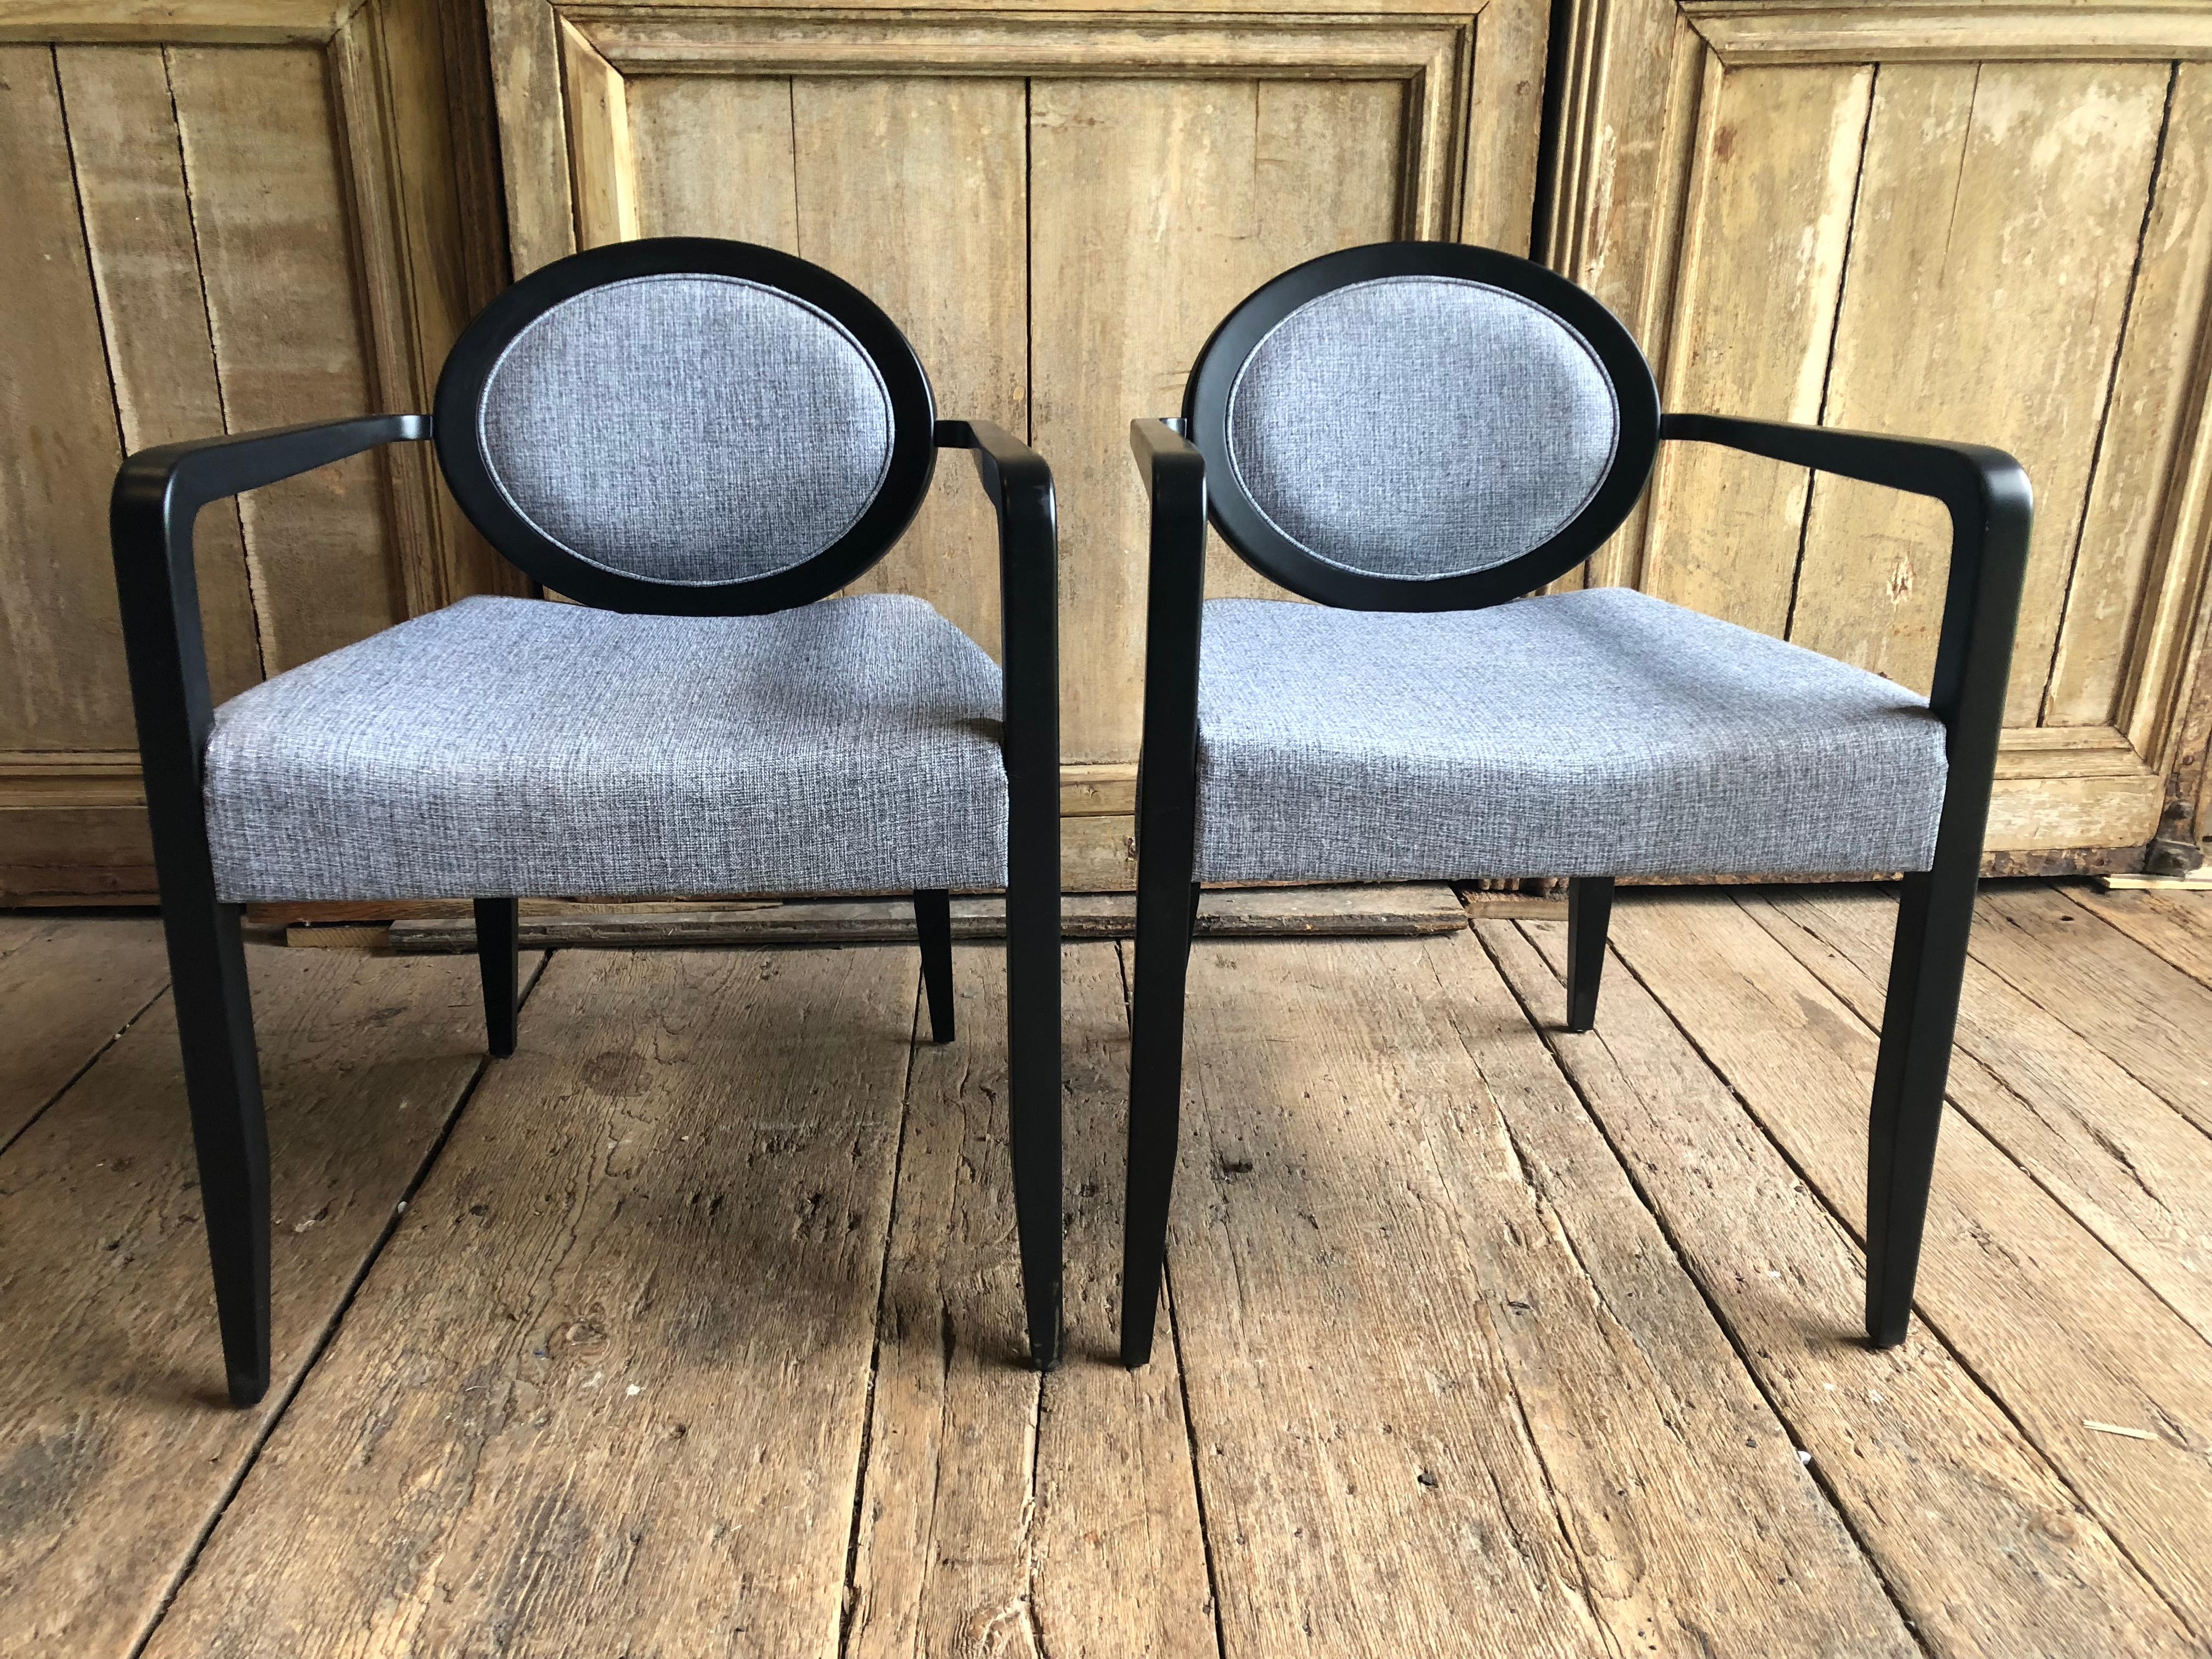 A pair of ultra modern “Elizabetha” armchairs in satin black lacquer finish manufactured by Capdell Furniture in Spain.